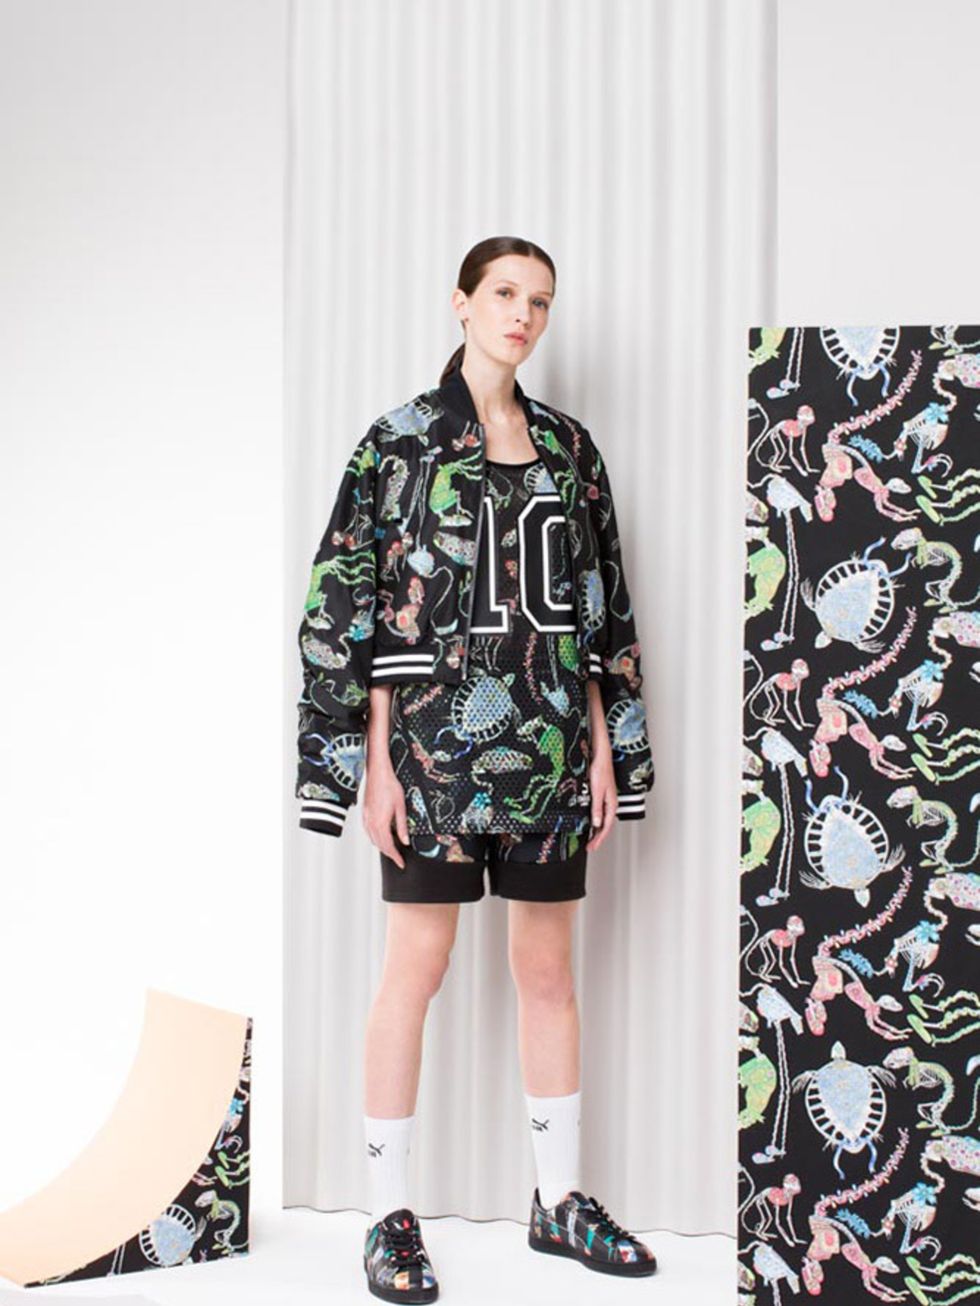 <p>Puma x Swash </p>

<p>Sports brand of the moment Puma has teamed up with London based print and fashion house SWASH London for the second season running. Famed for thie bold and detailed sketches, Puma has had an arty injection to their spring summrer 